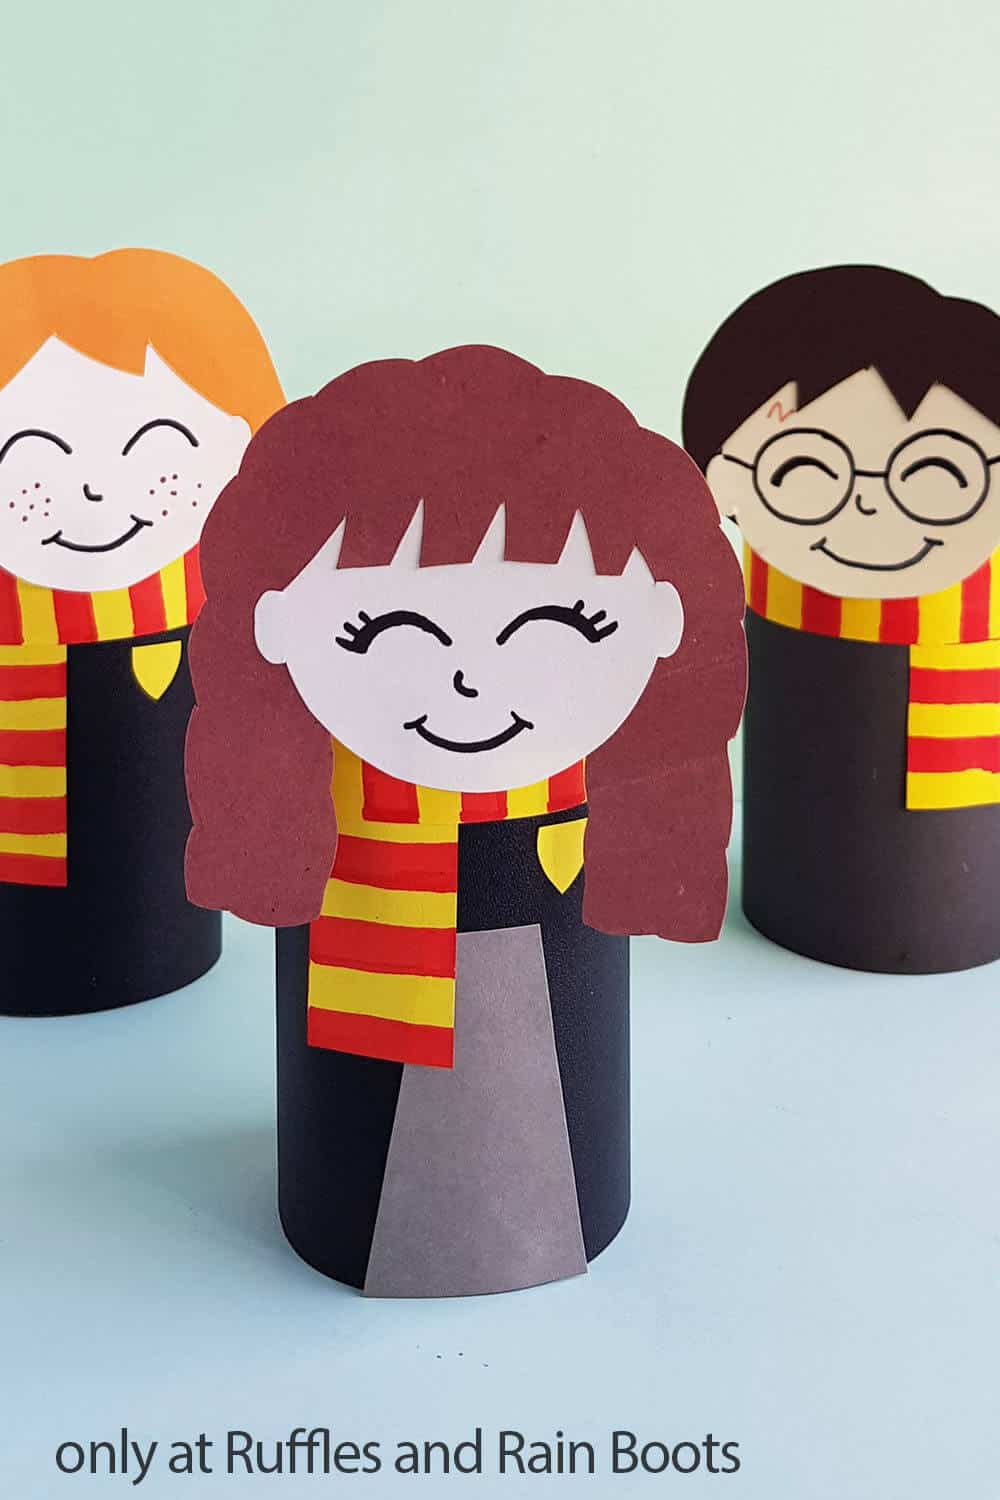 hermione paper craft doll with harry potter doll and ron weasly doll